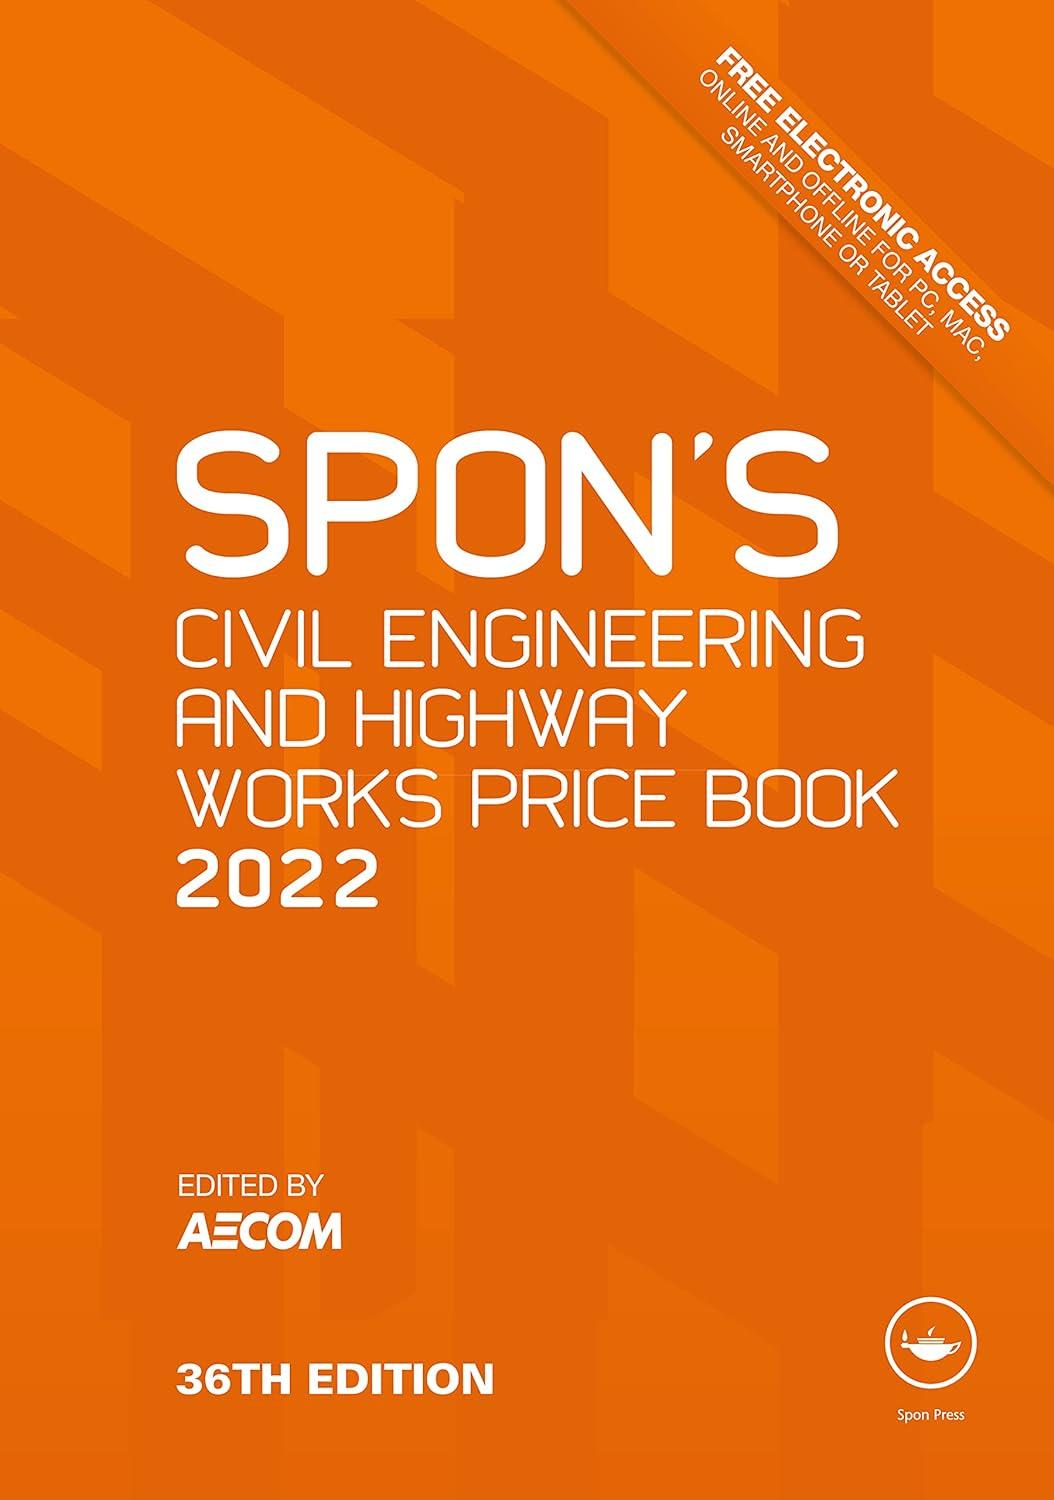 spons civil engineering and highway works price book 2022 36th edition aecom 1032052201, 978-1032052205